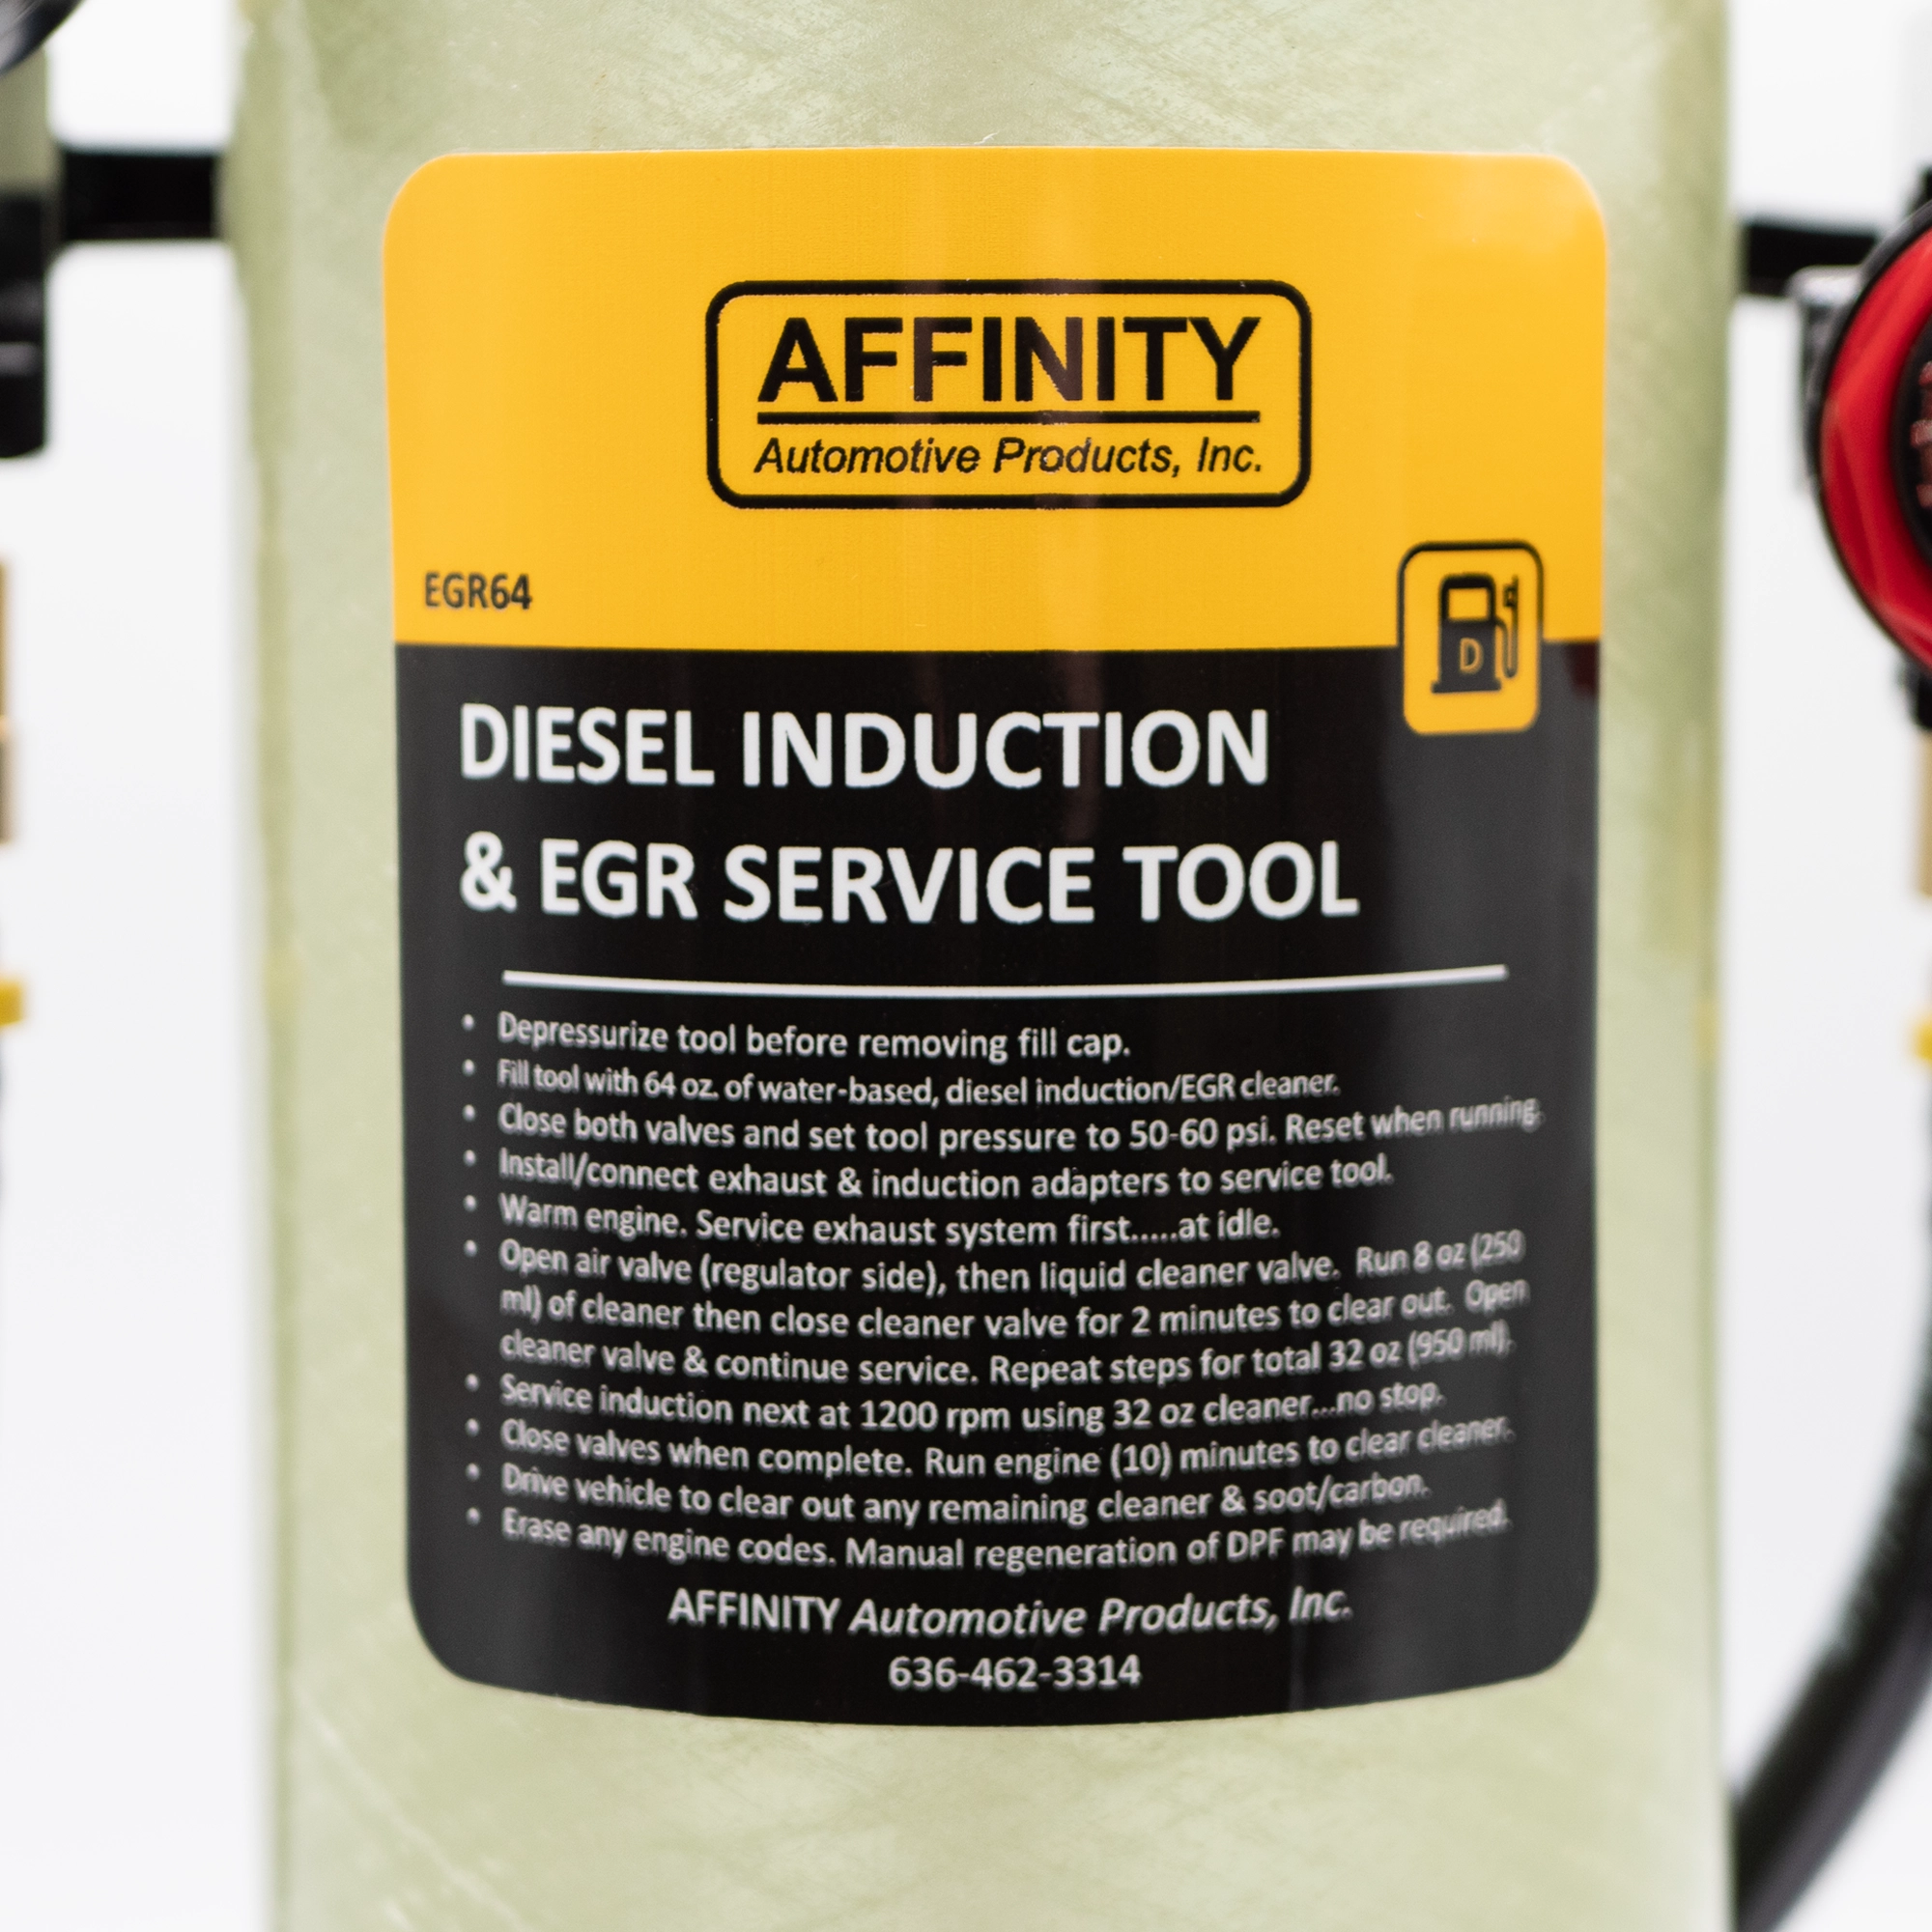 Diesel Induction and EGR Service Tool (EGR64)